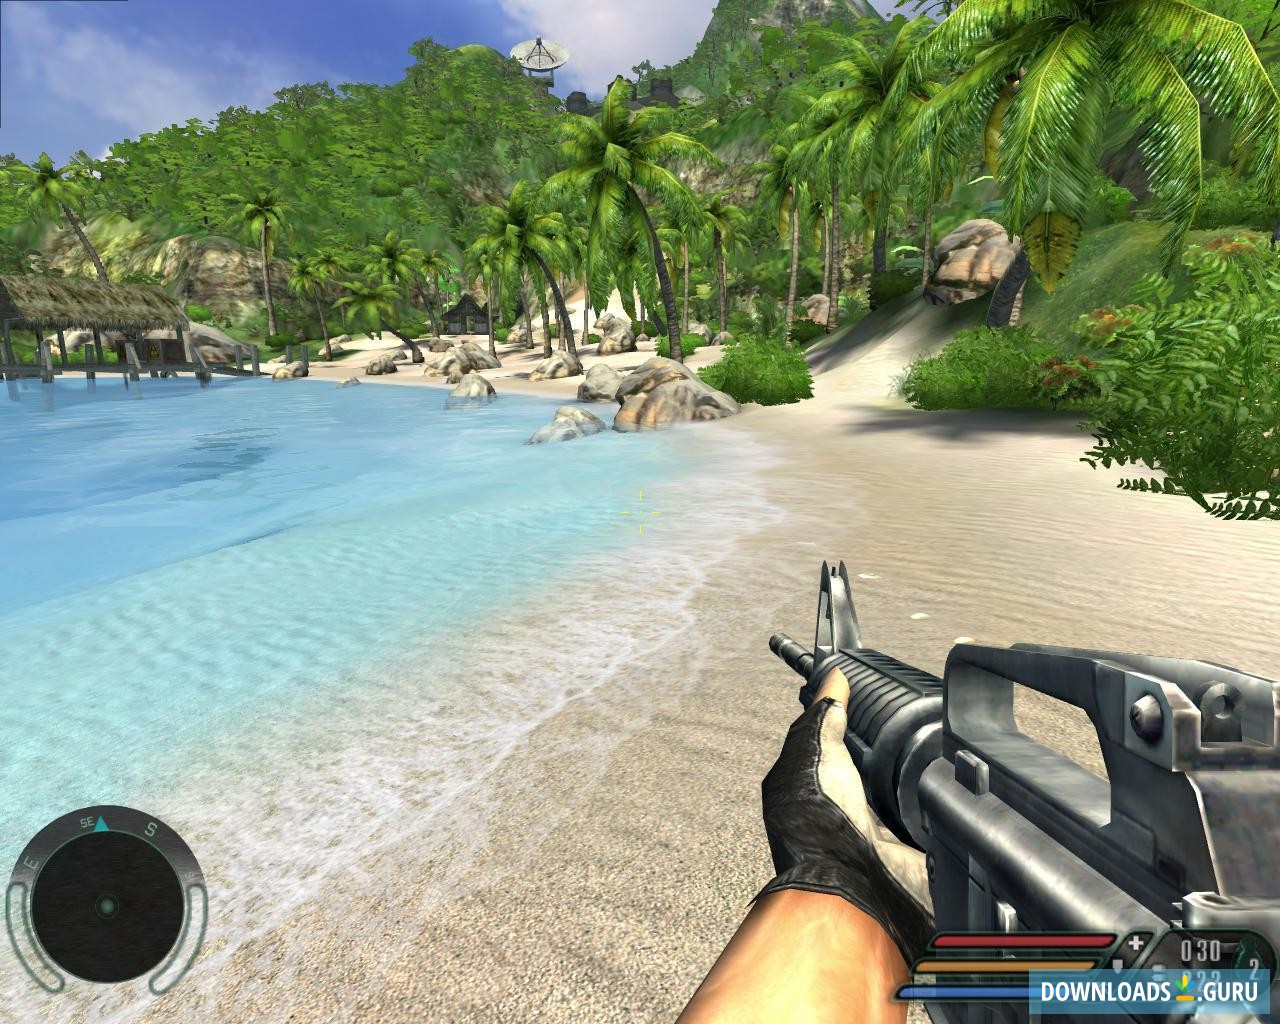 download far cry 3 for windows 10 for free